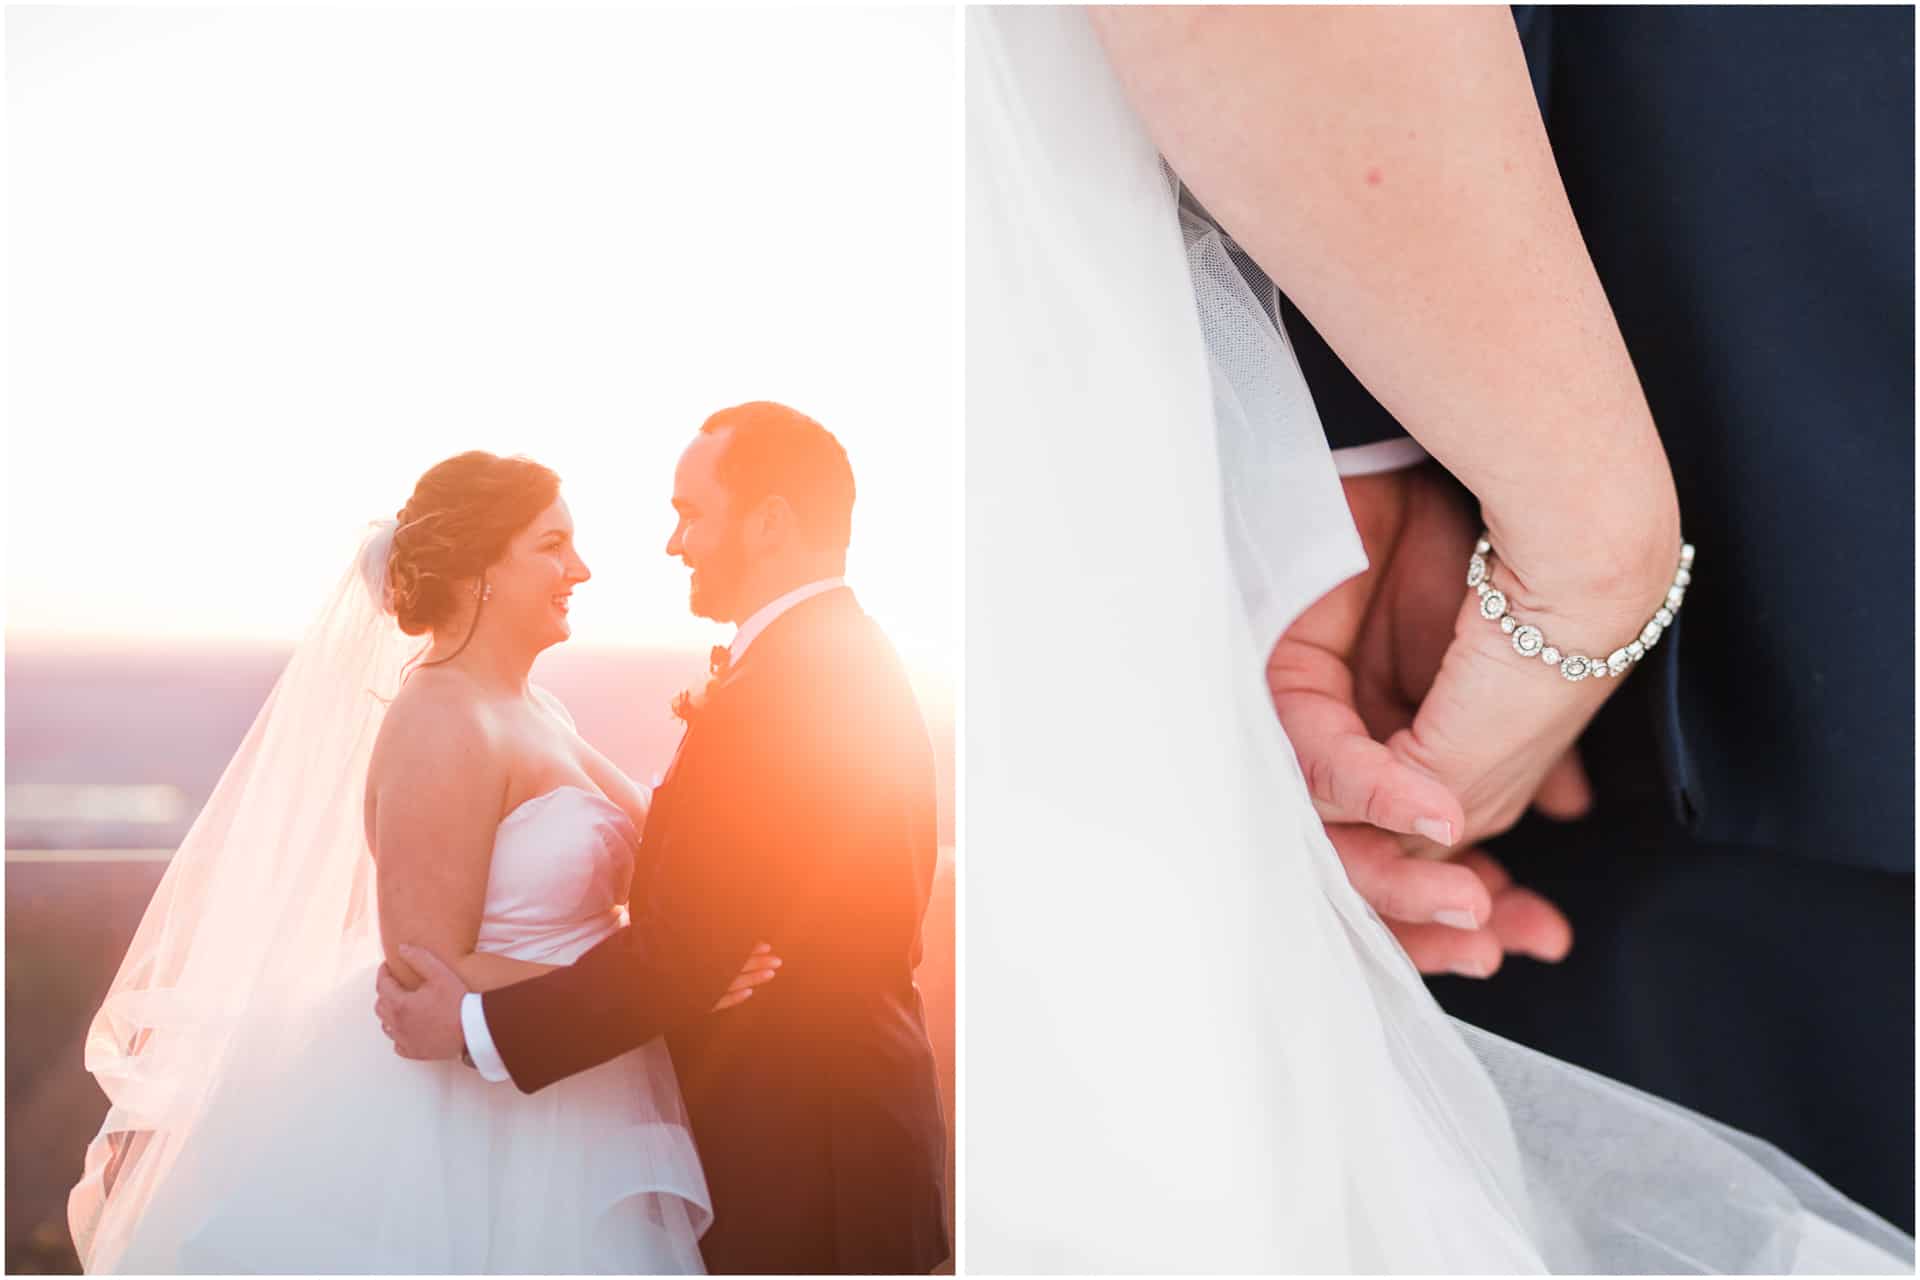 29 Bride And Groom Wedding Portraits The View Burritt On The Mountain Sunset Golden Hour Holding Hands